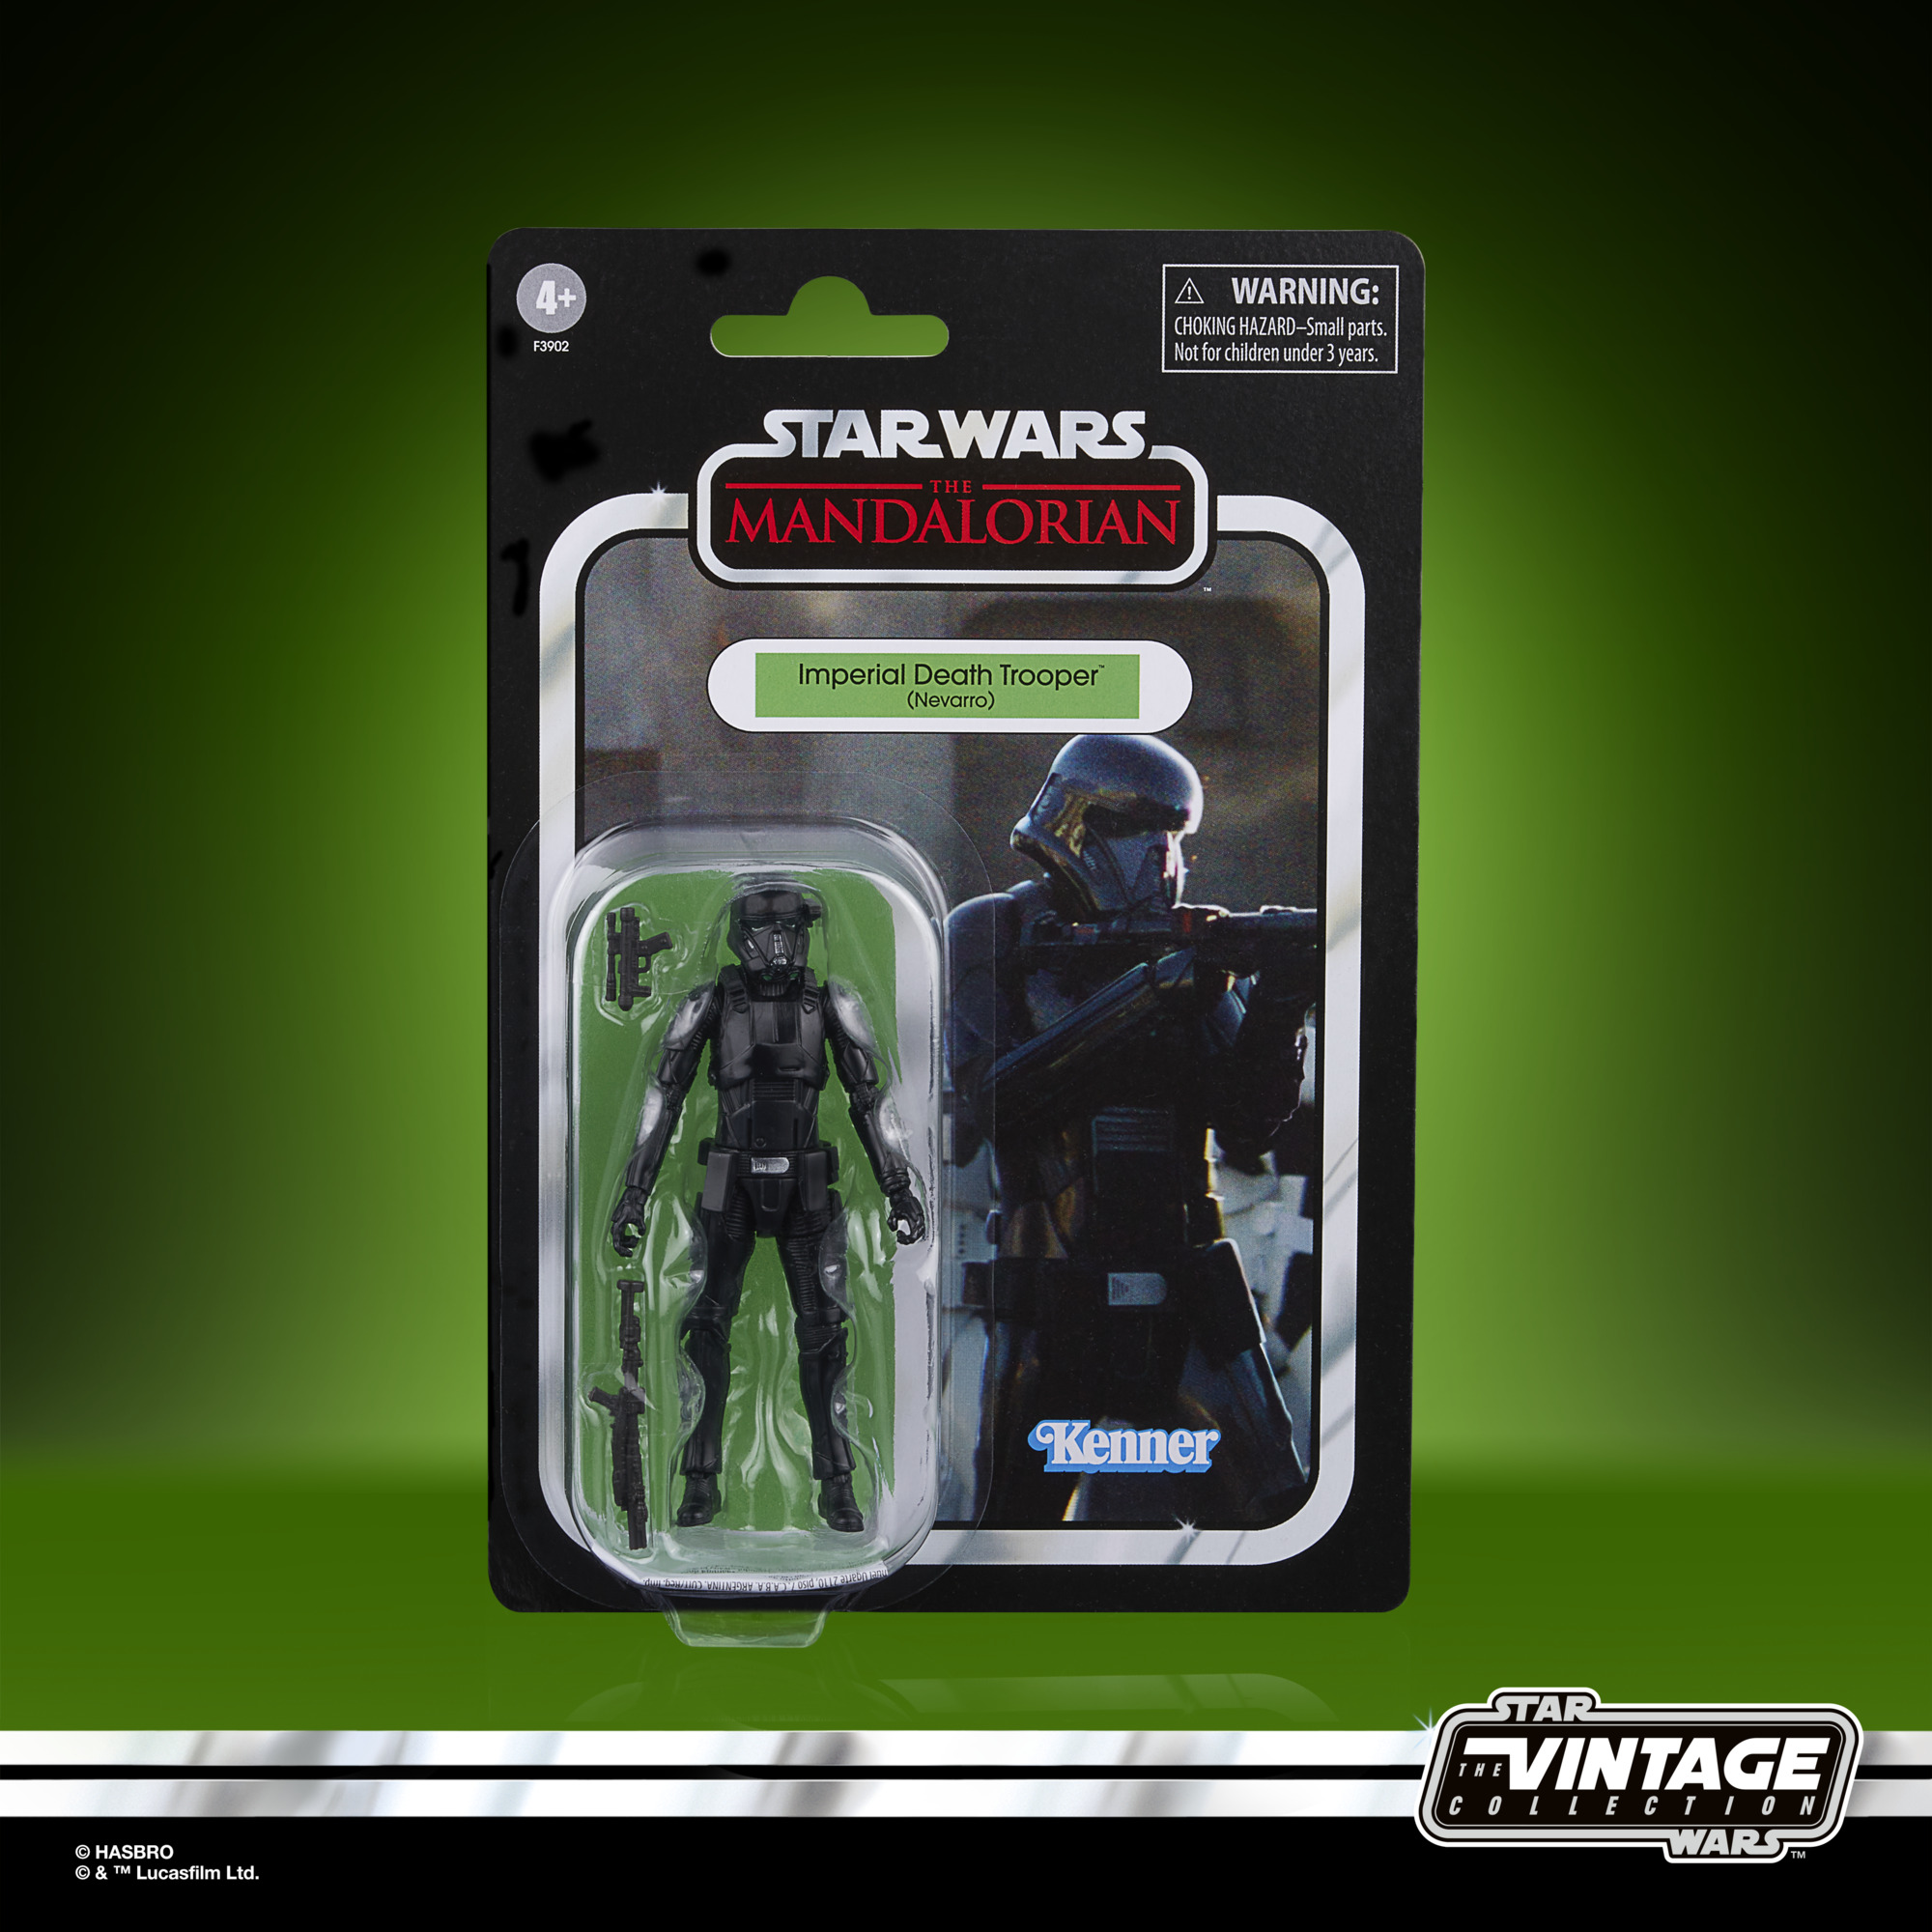 Star Wars The Vintage Collection Nevarro Cantina & Imperial Death Trooper (Nevarro) F39025L0 5010993957545